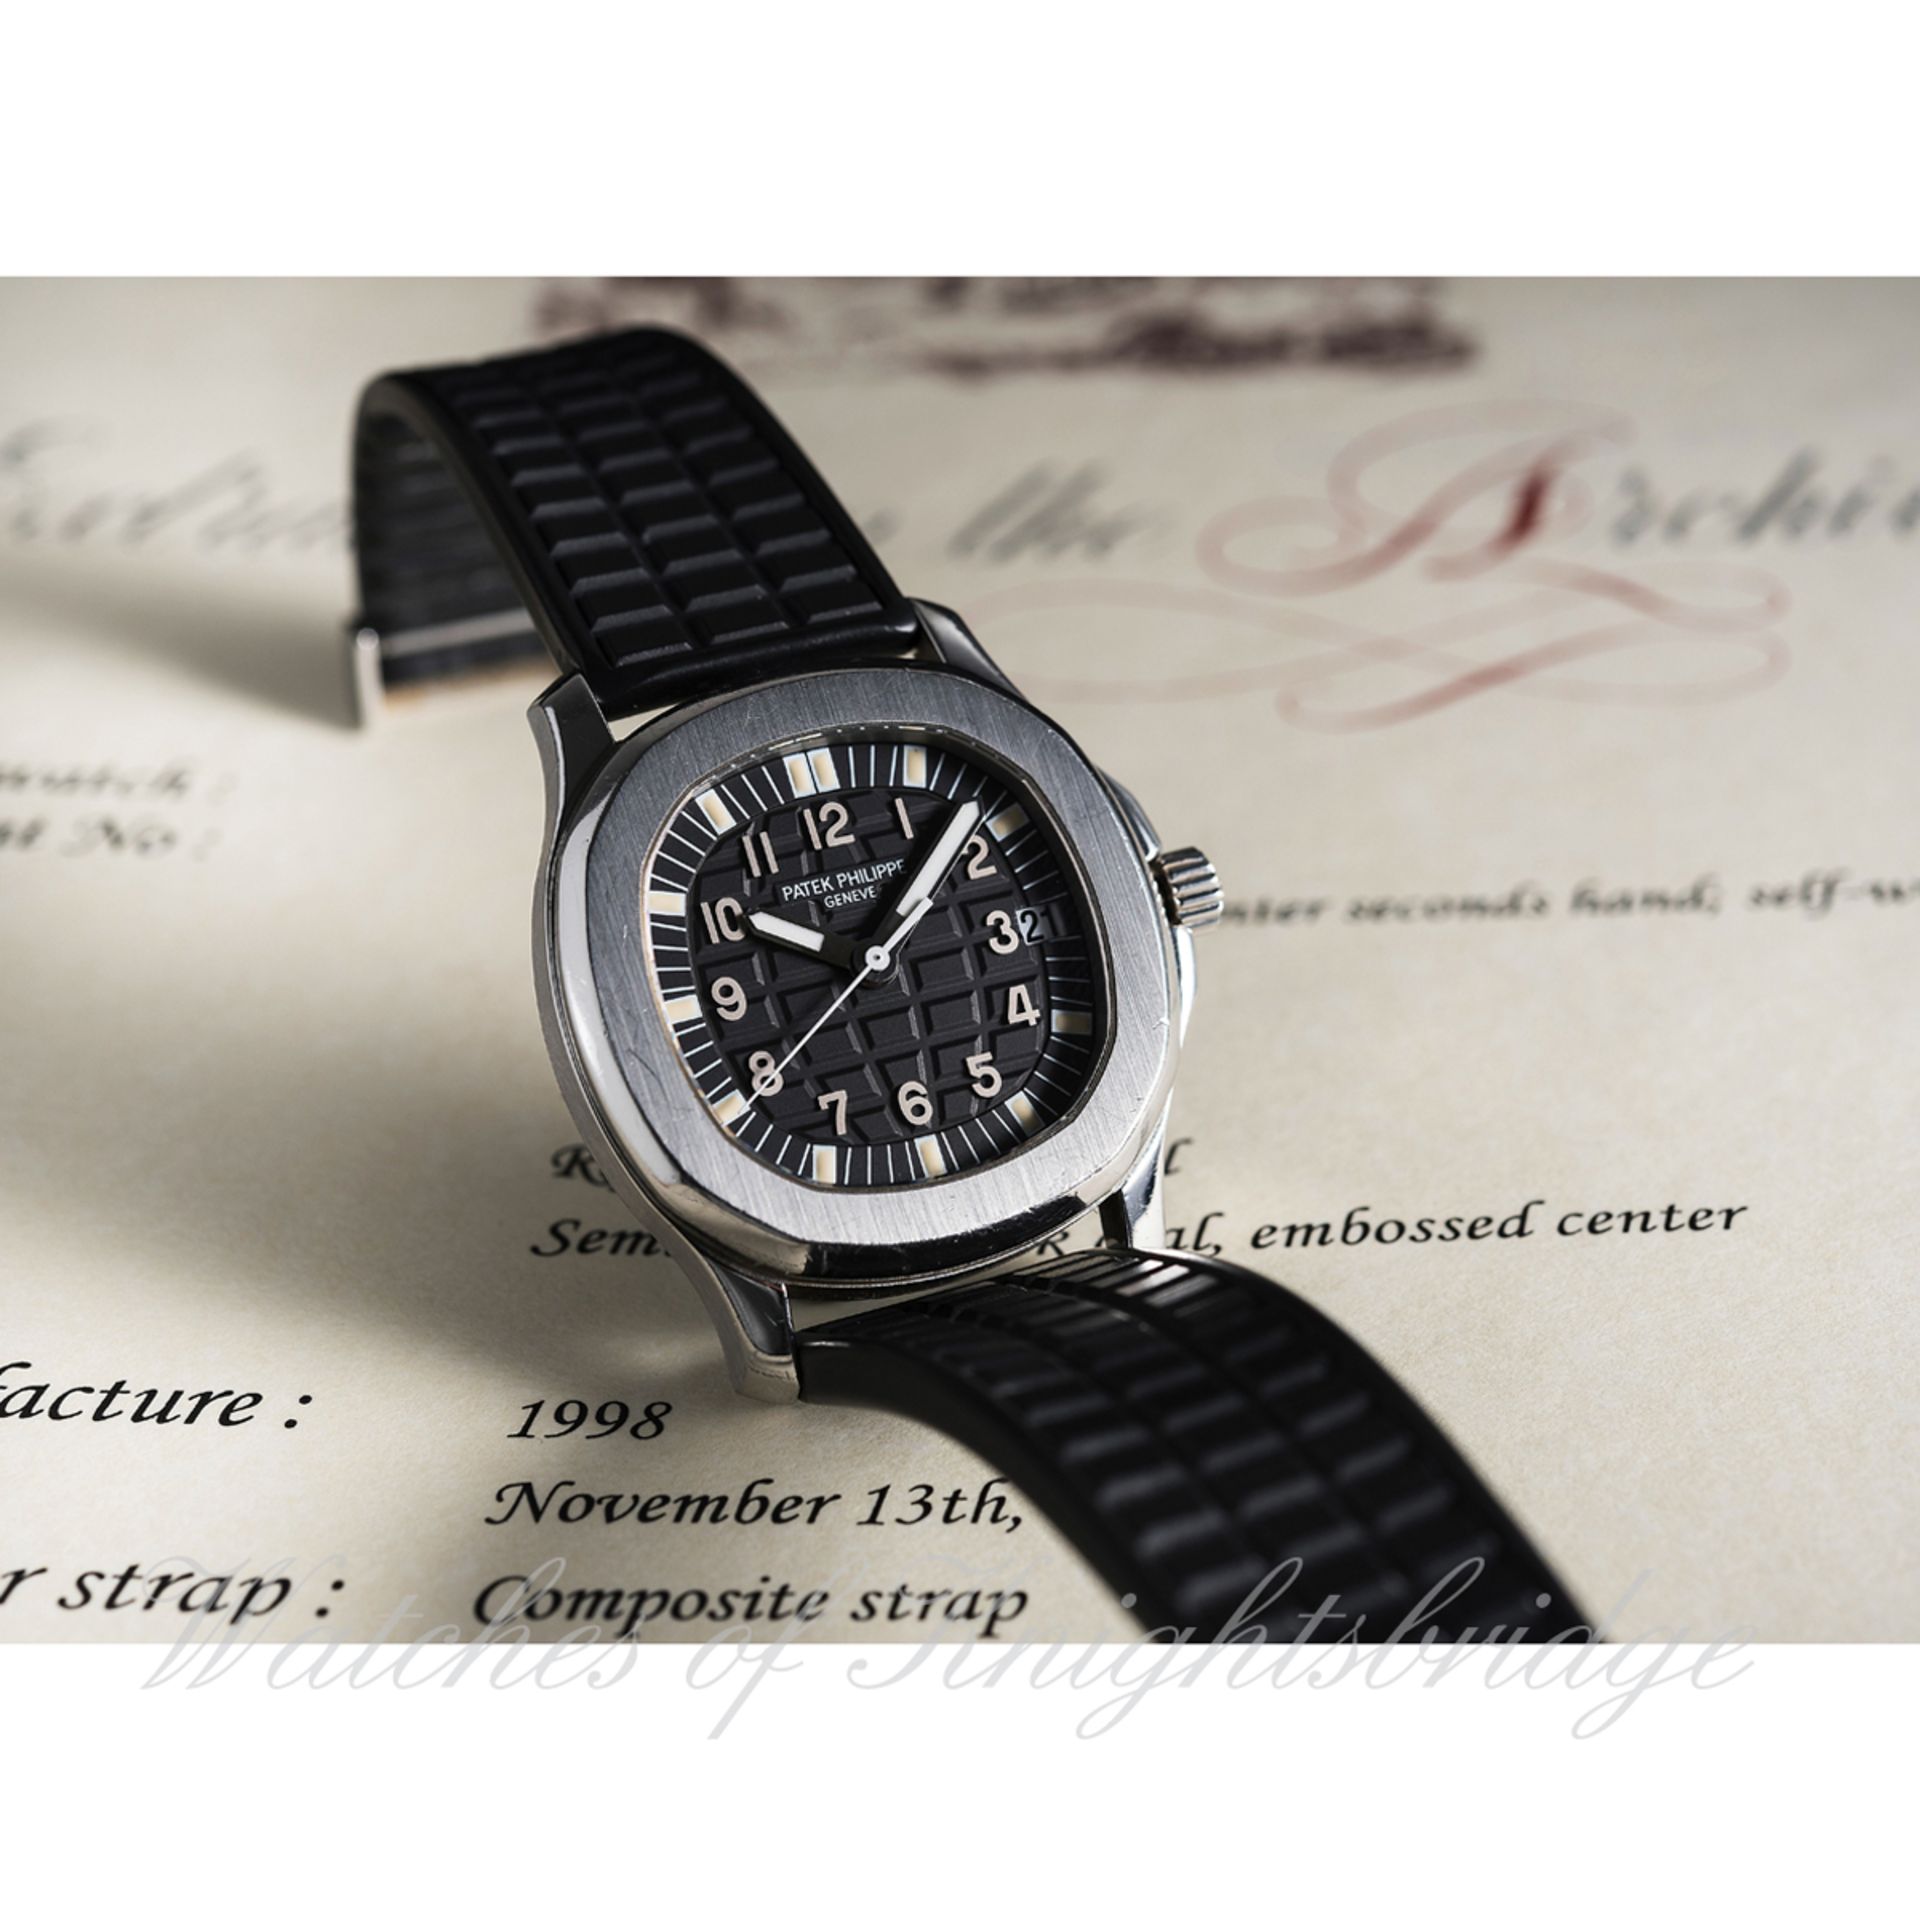 A GENTLEMAN'S STAINLESS STEEL PATEK PHILIPPE AQUANAUT AUTOMATIC WRIST WATCH DATED 1998, REF. 5066A - Image 2 of 2